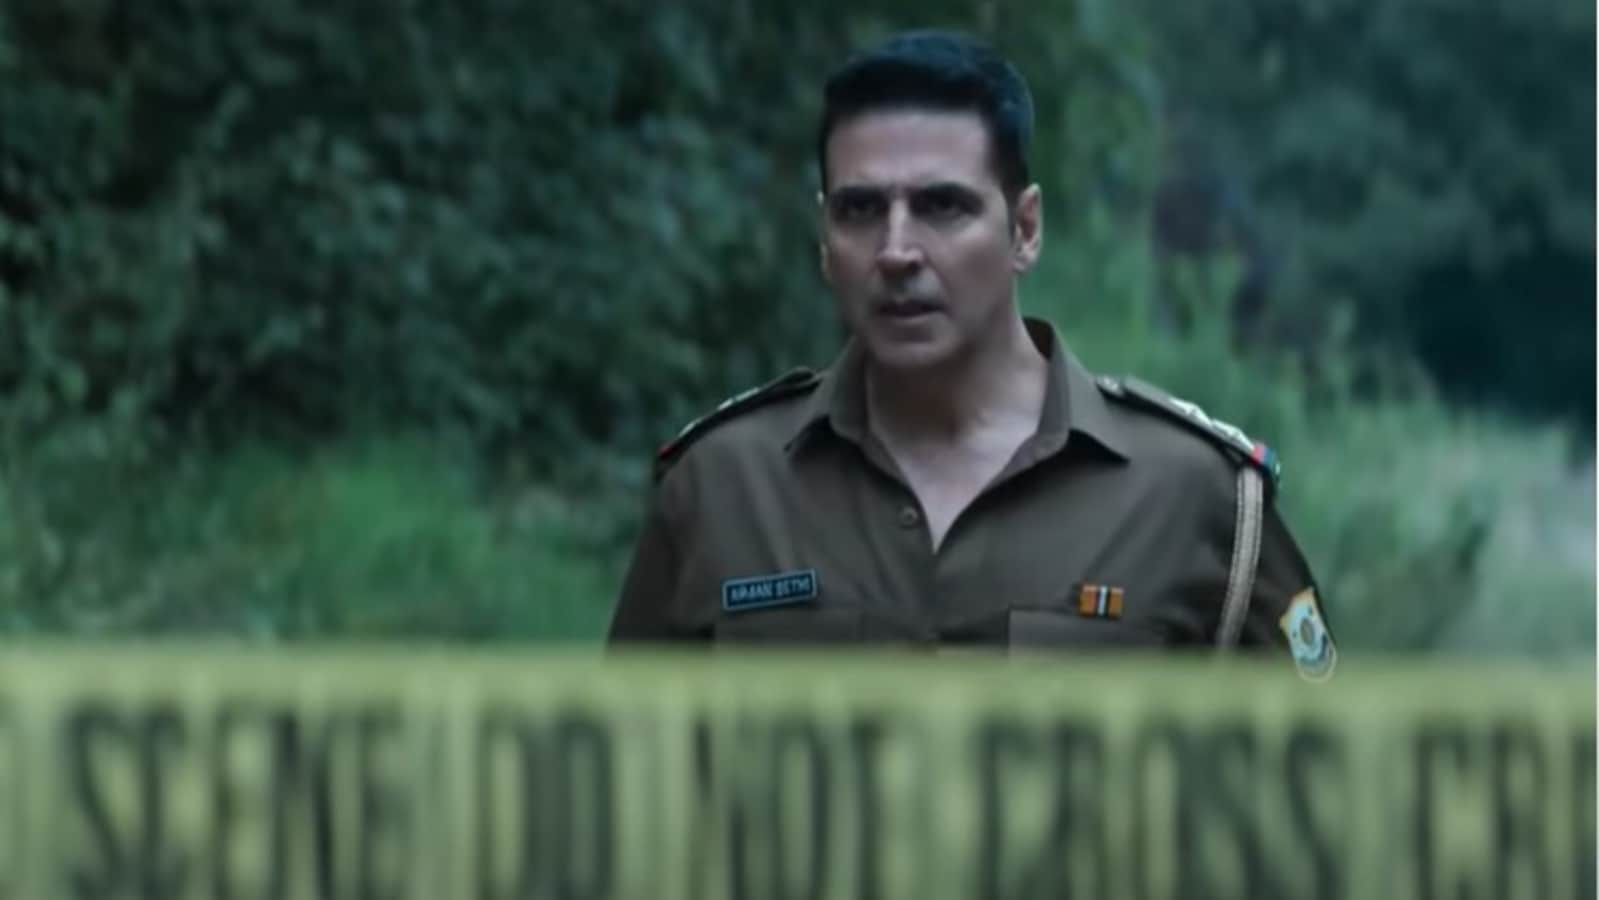 Cuttputlli review: Akshay Kumar as raw and real cop is refreshing even in a predictable story